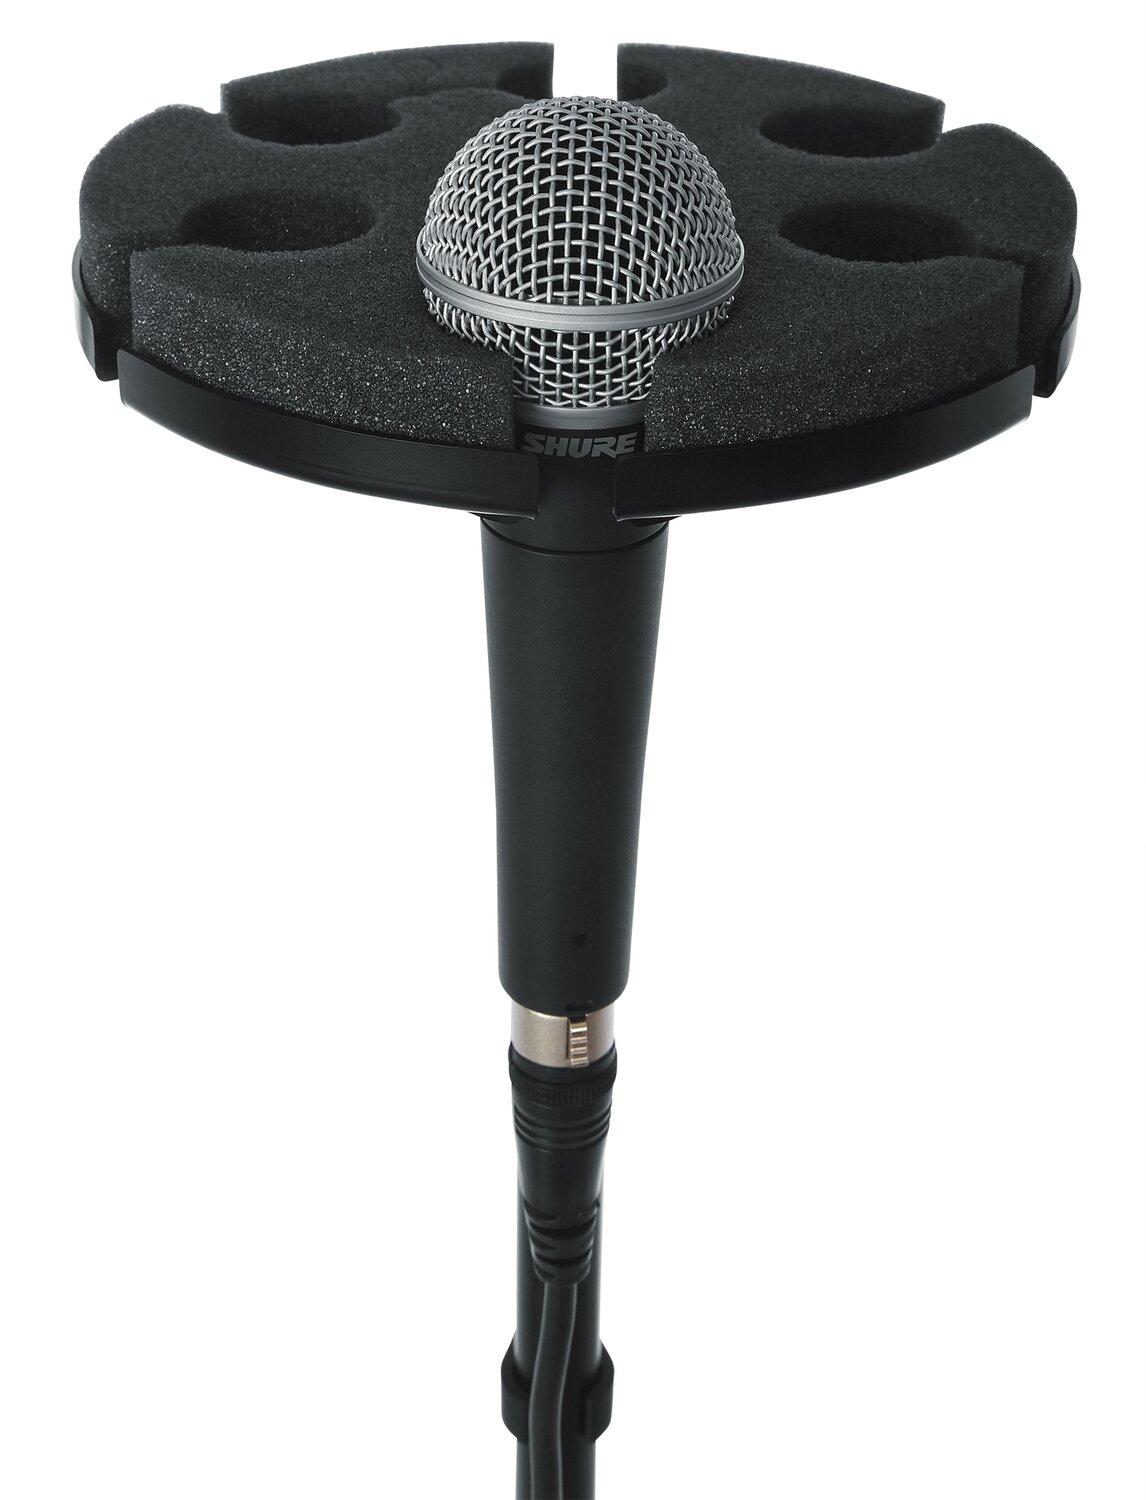 Gator Cases Frameworks Multi Microphone Tray for 6 Mics #GAMIC6TRAY • MFR #GFW-MIC-6TRAY